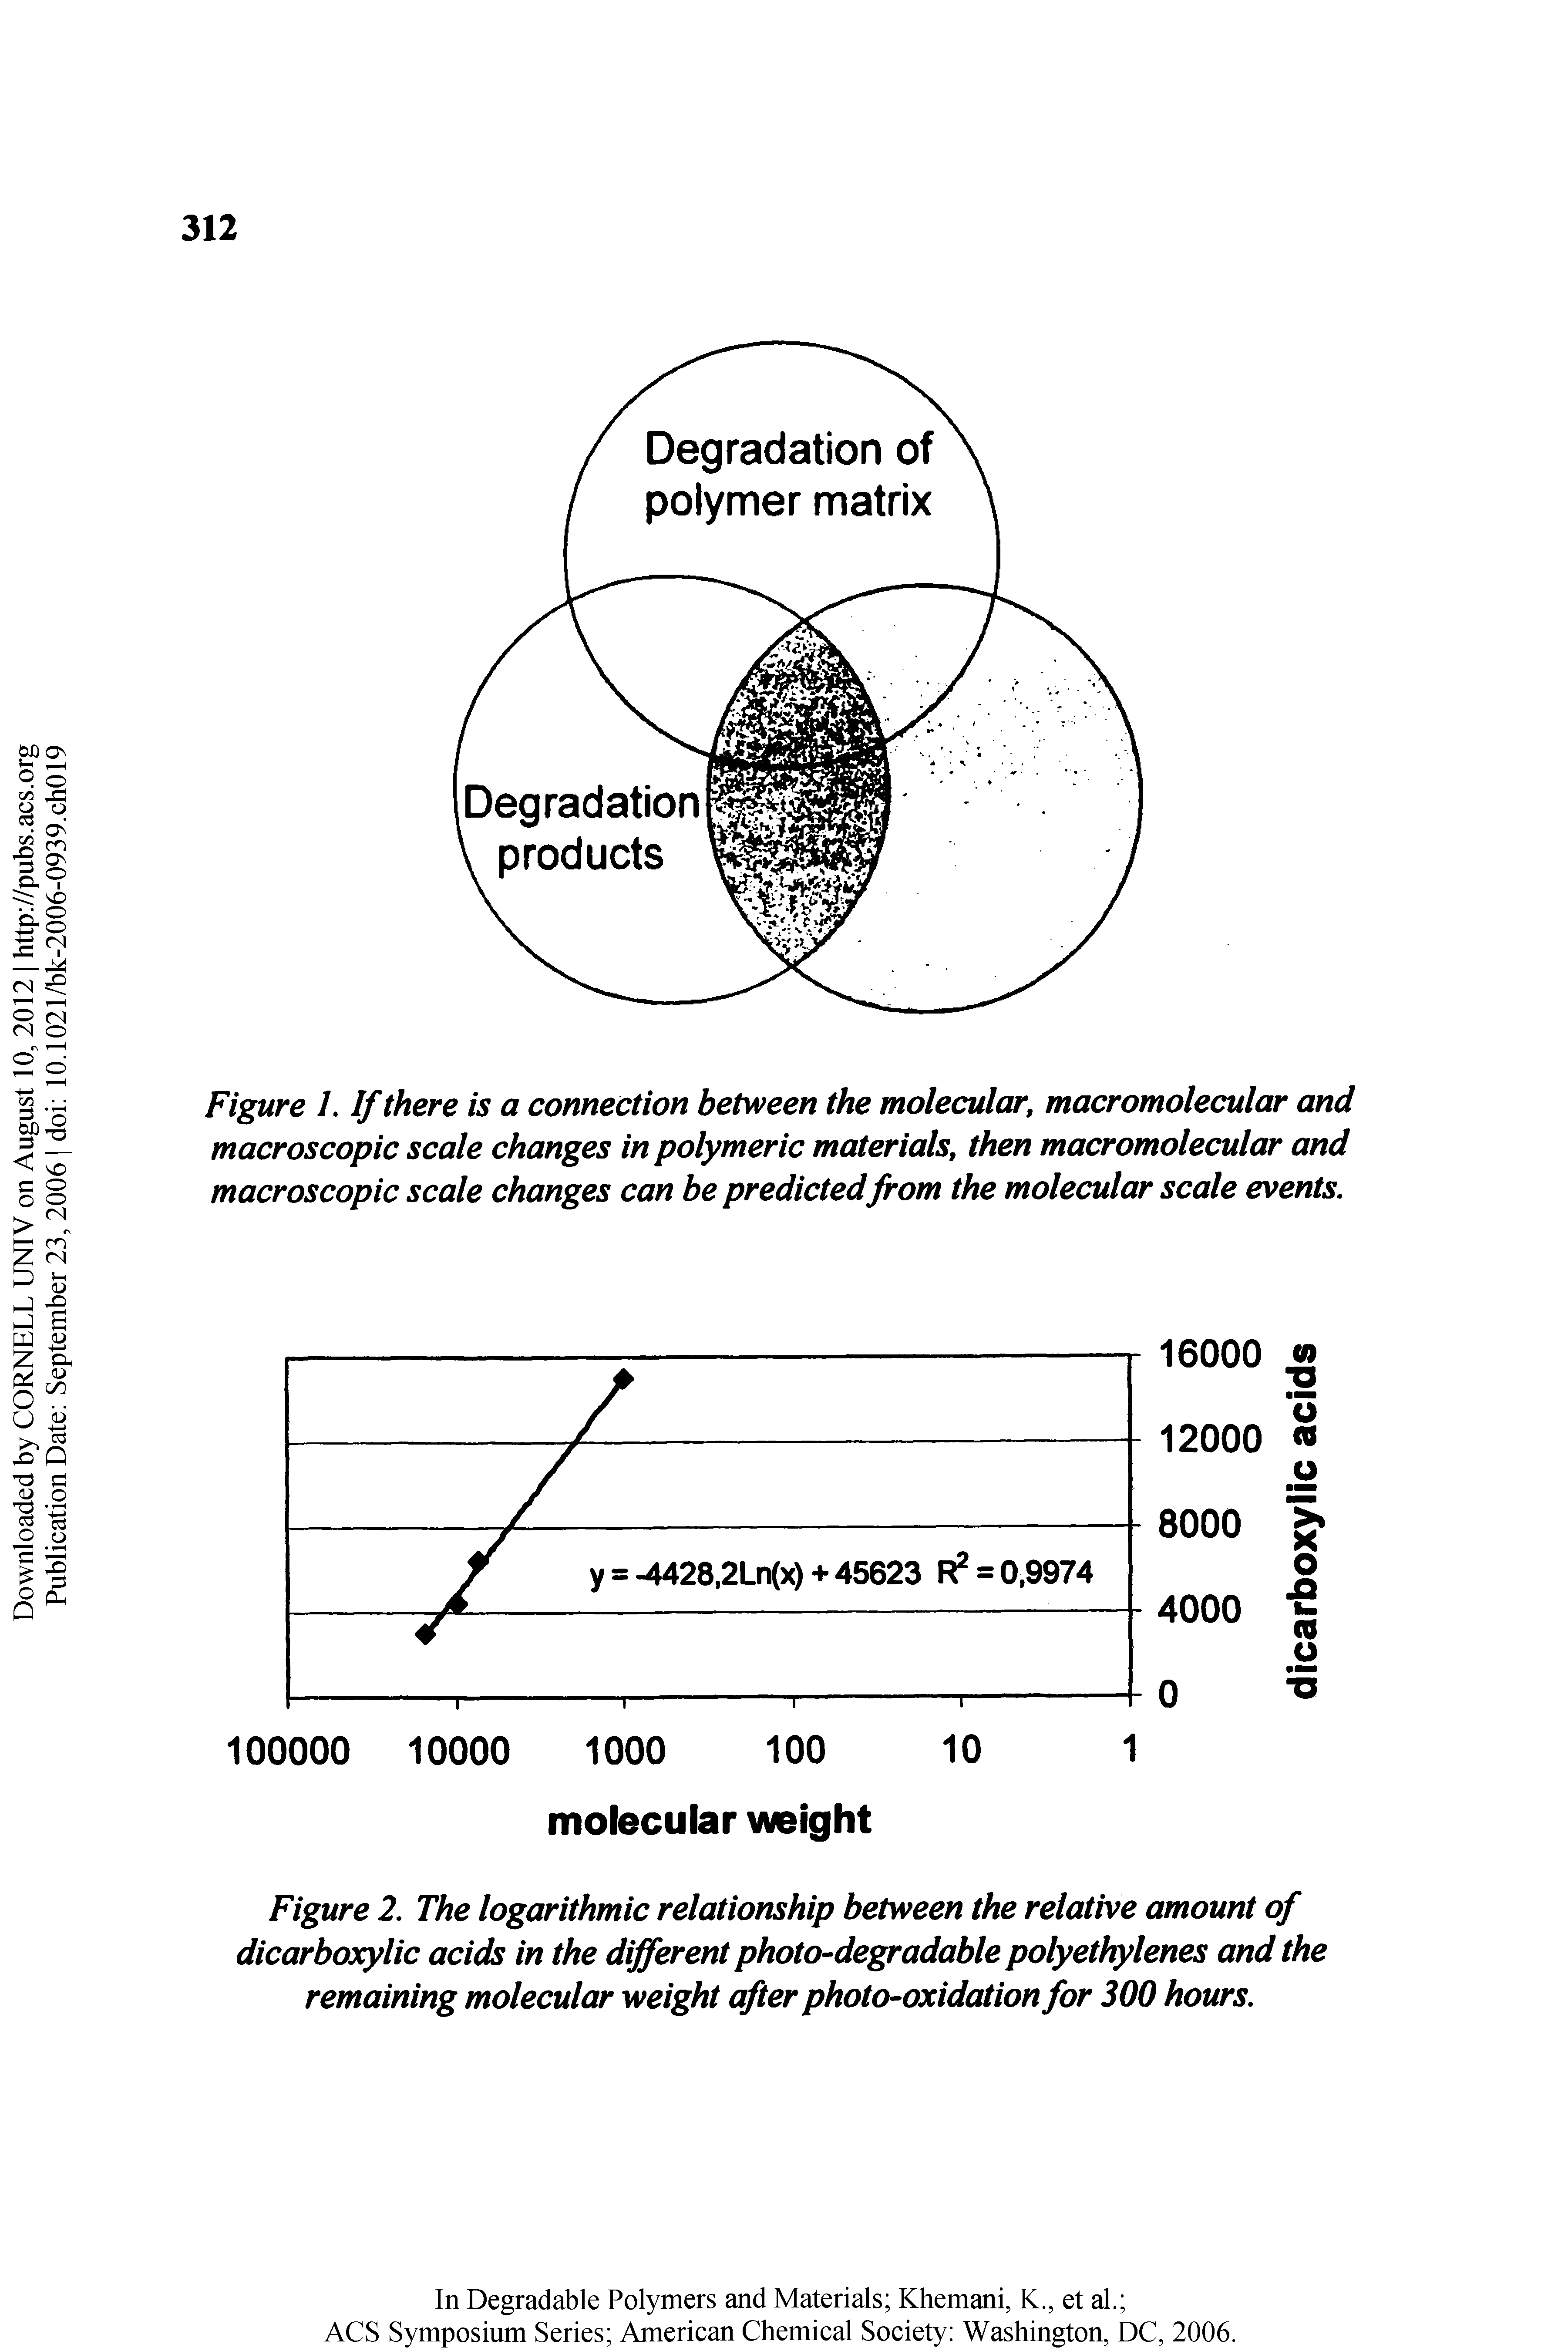 Figure 1. If there is a connection between the molecular, macromolecular and macroscopic scale changes in polymeric materials, then macromolecular and macroscopic scale changes can be predicted from the molecular scale events.